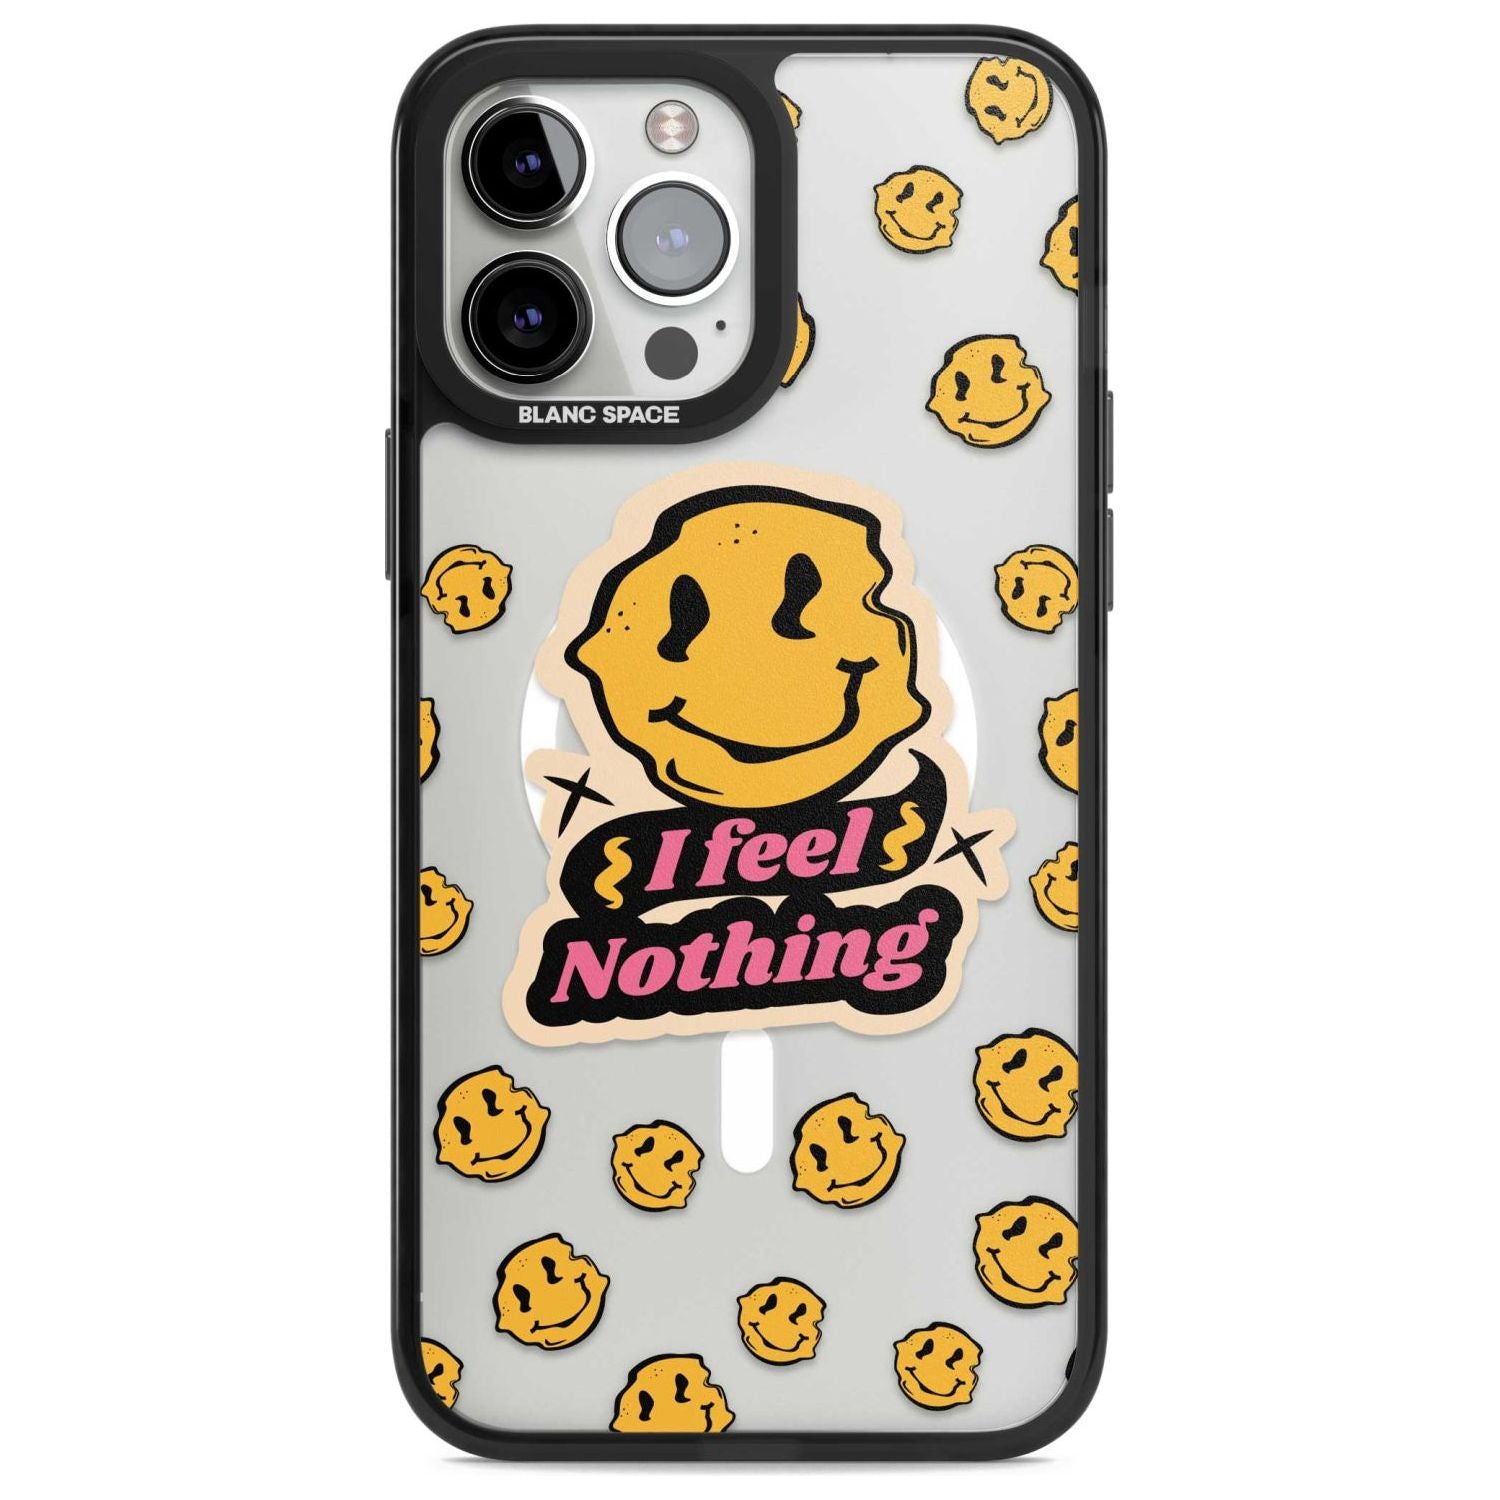 I feel nothing (Clear) Phone Case iPhone 13 Pro Max / Magsafe Black Impact Case Blanc Space